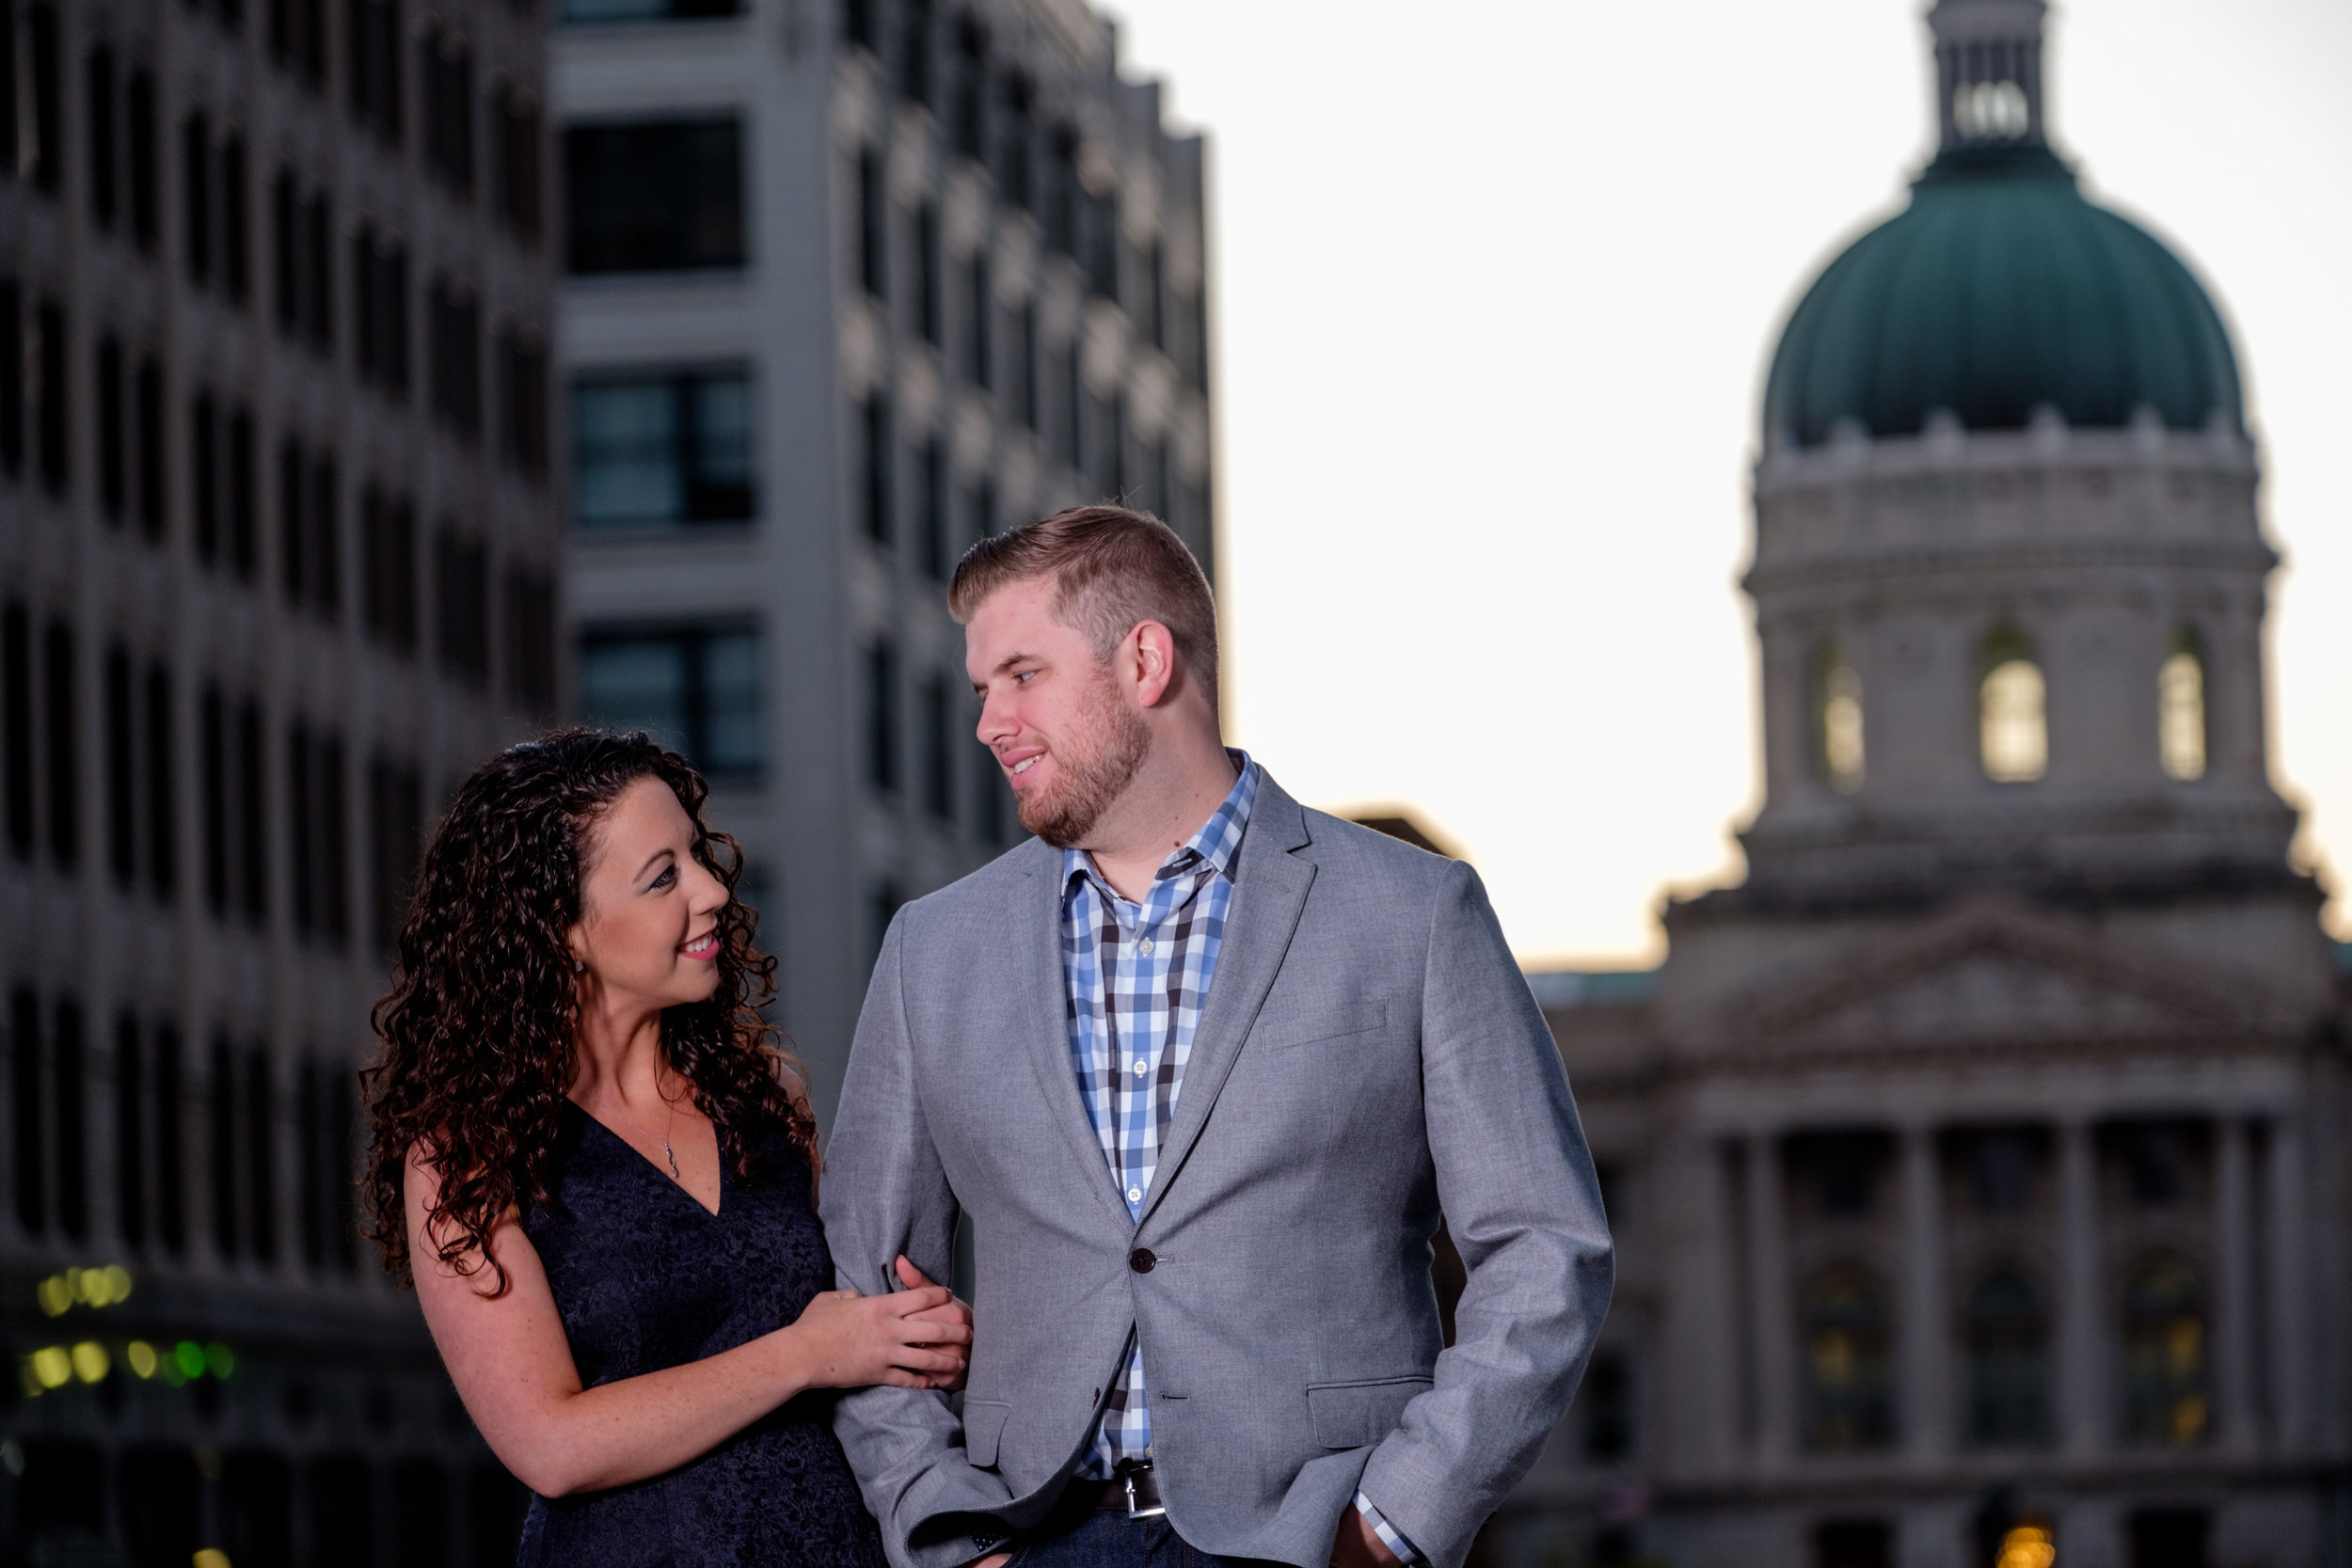 Downtown-Indianapolis-night-engagement-pictures-04.jpg